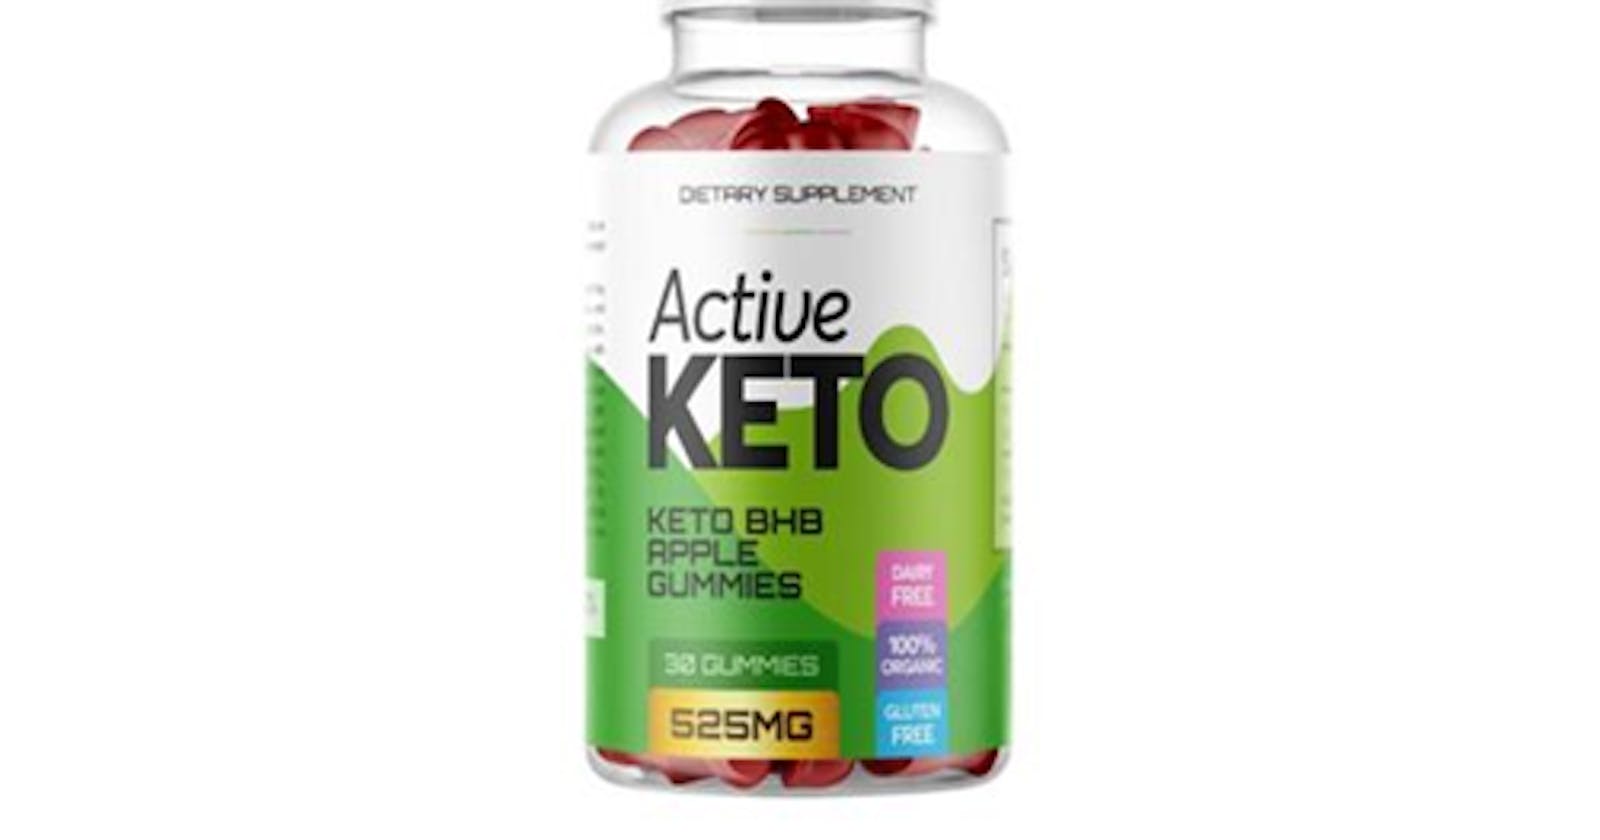 Undefined Keto Gummies Reviews, Price, Side Effects, For Weight Loss Reviews?